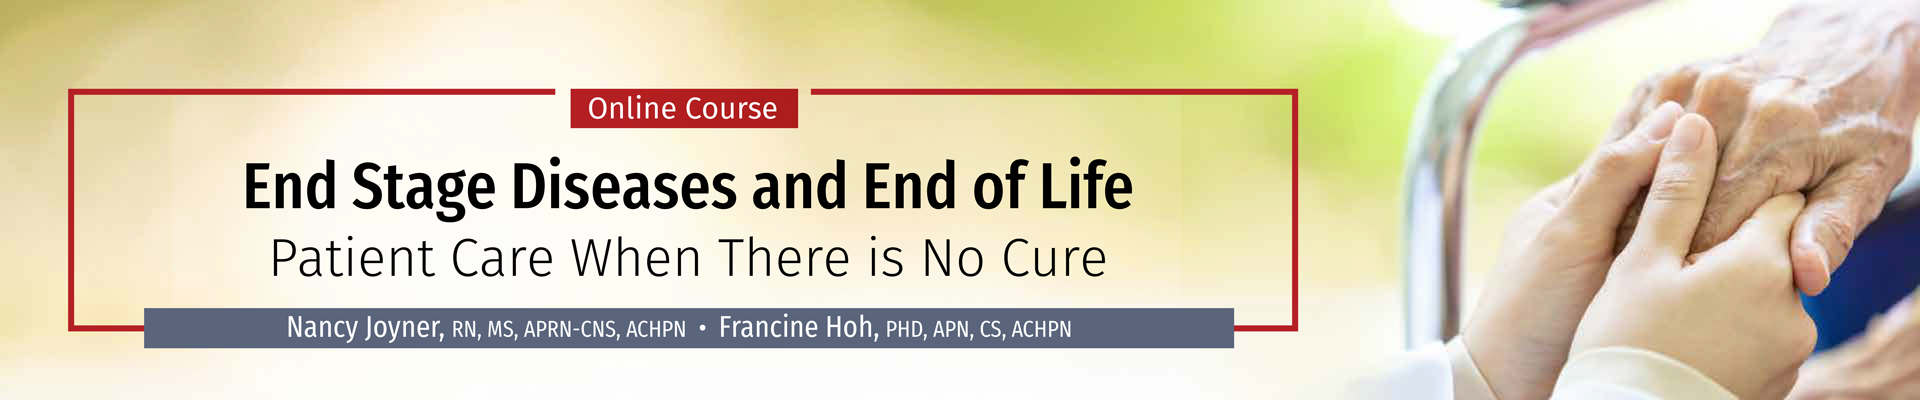 End Stage Diseases and End of Life Online Course